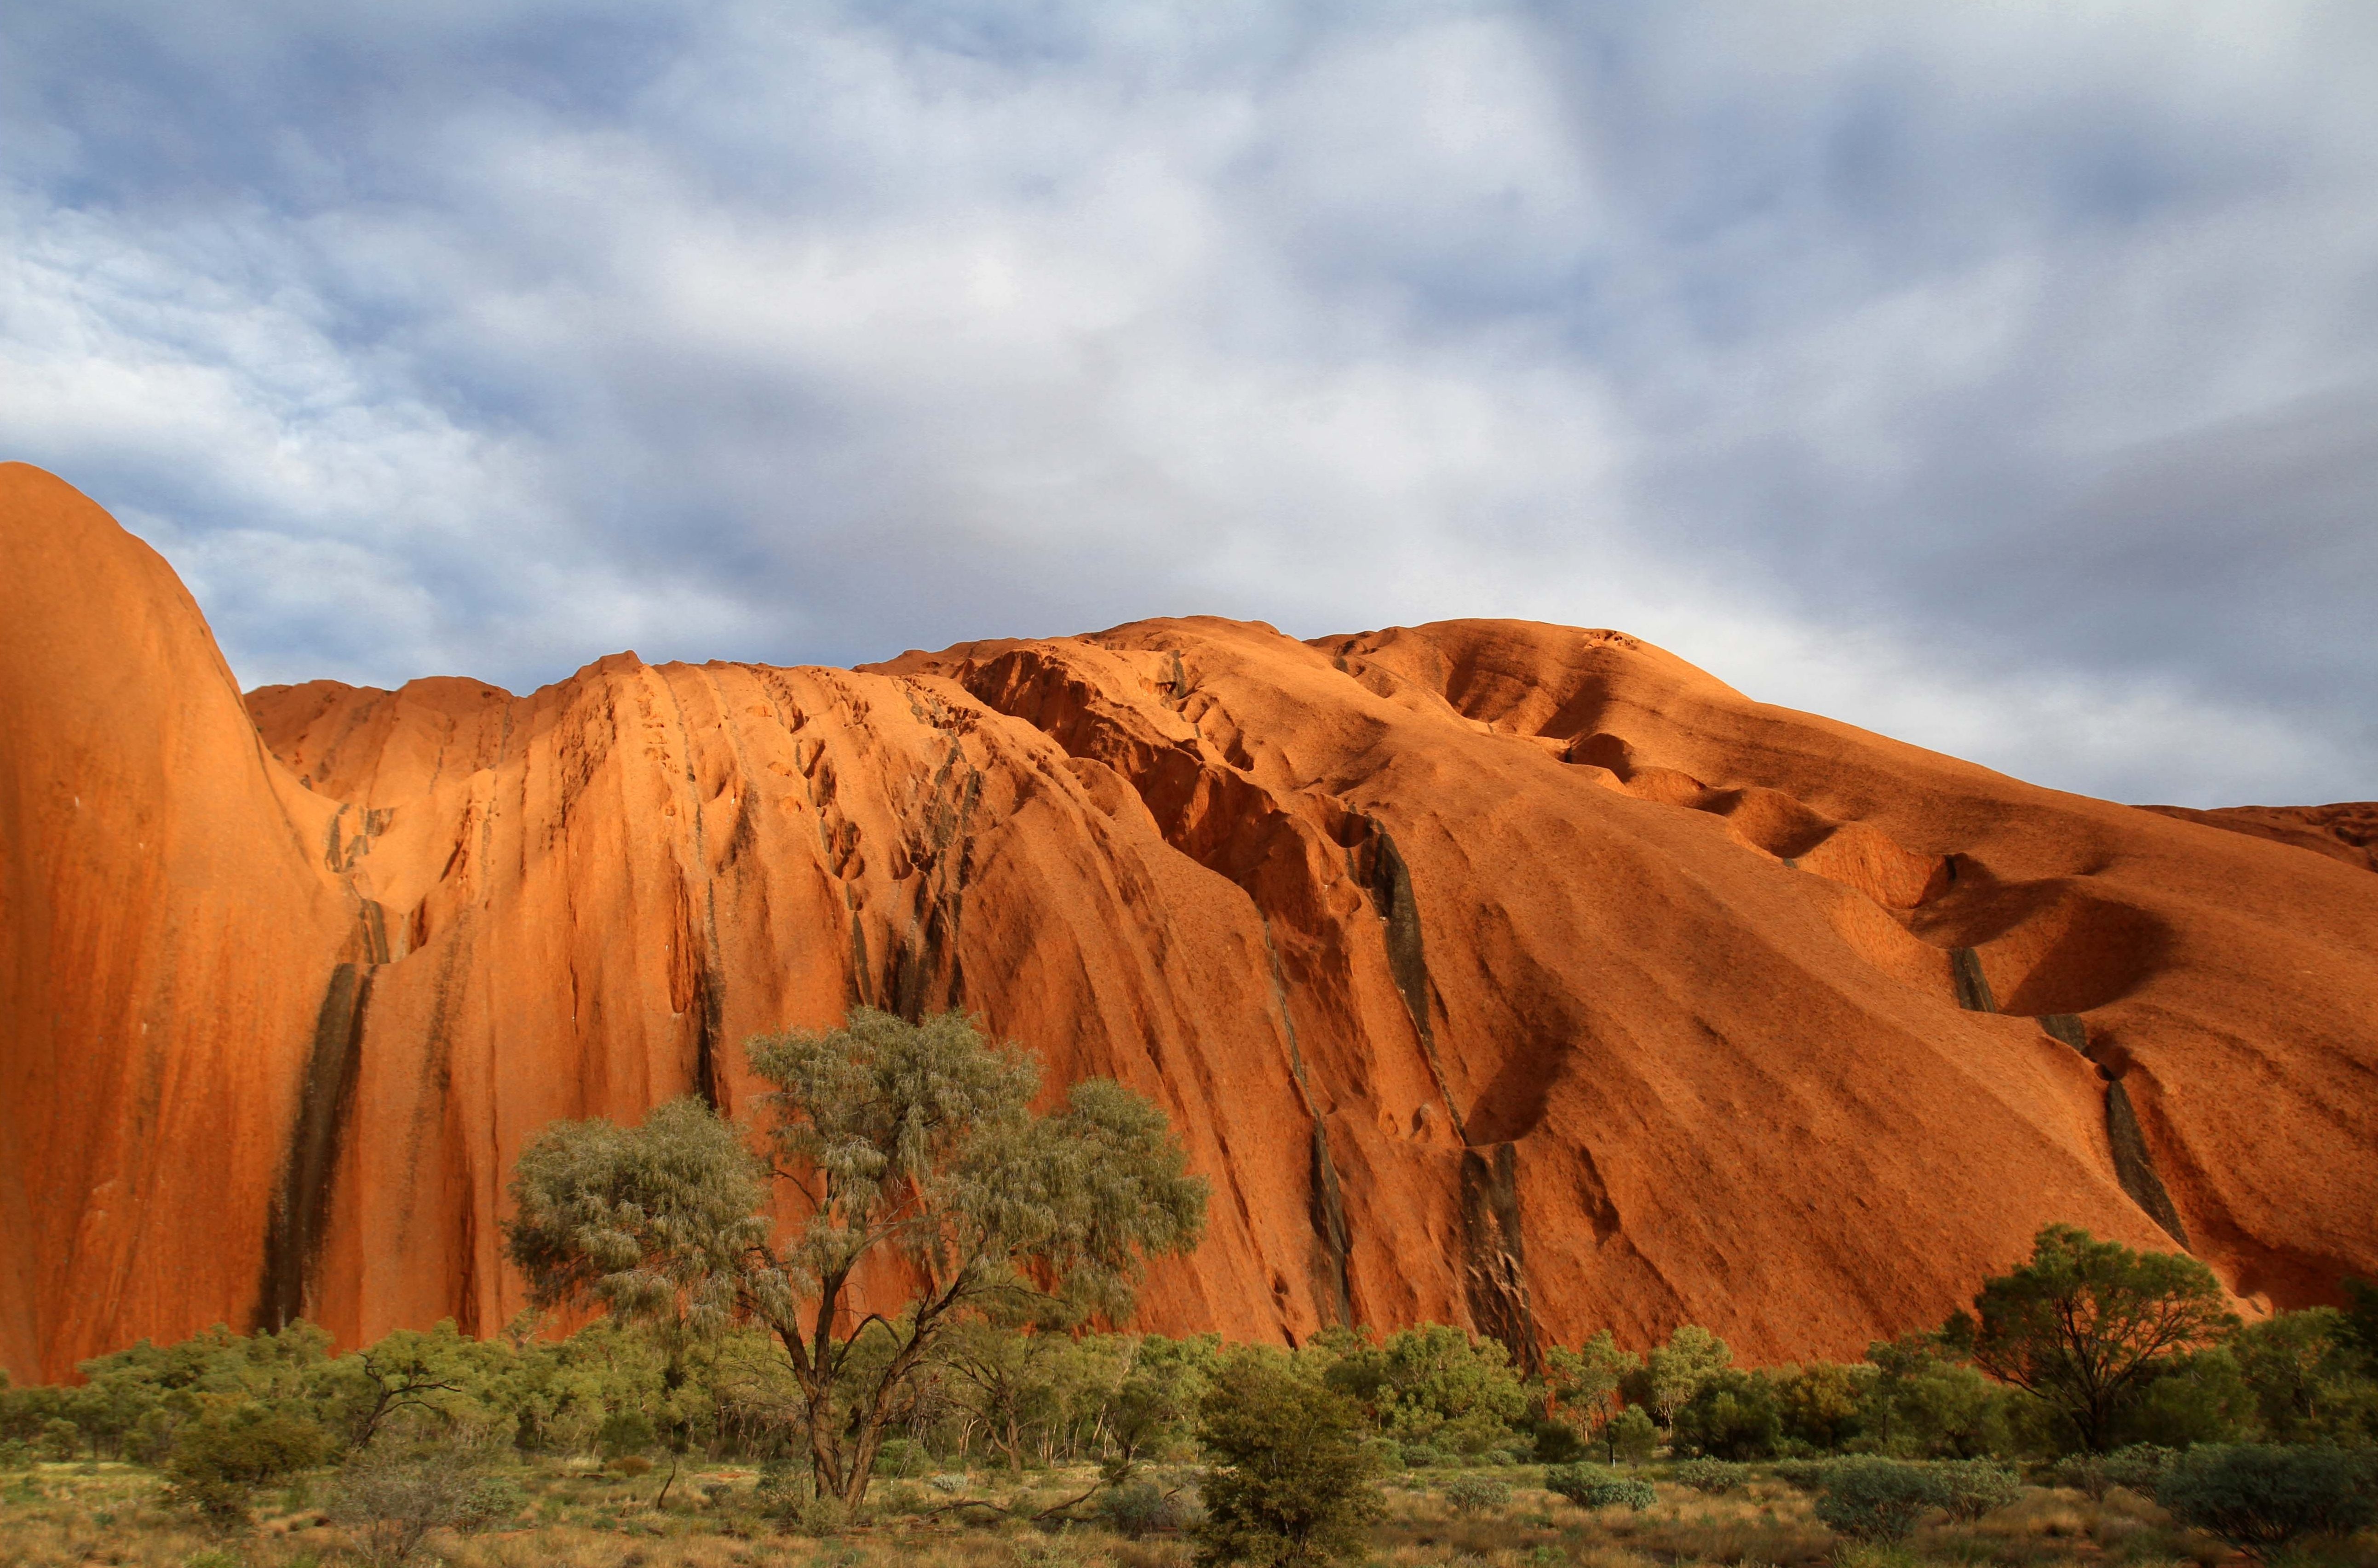 Ayers Rock in the Northern Territory Australia by maximus1954